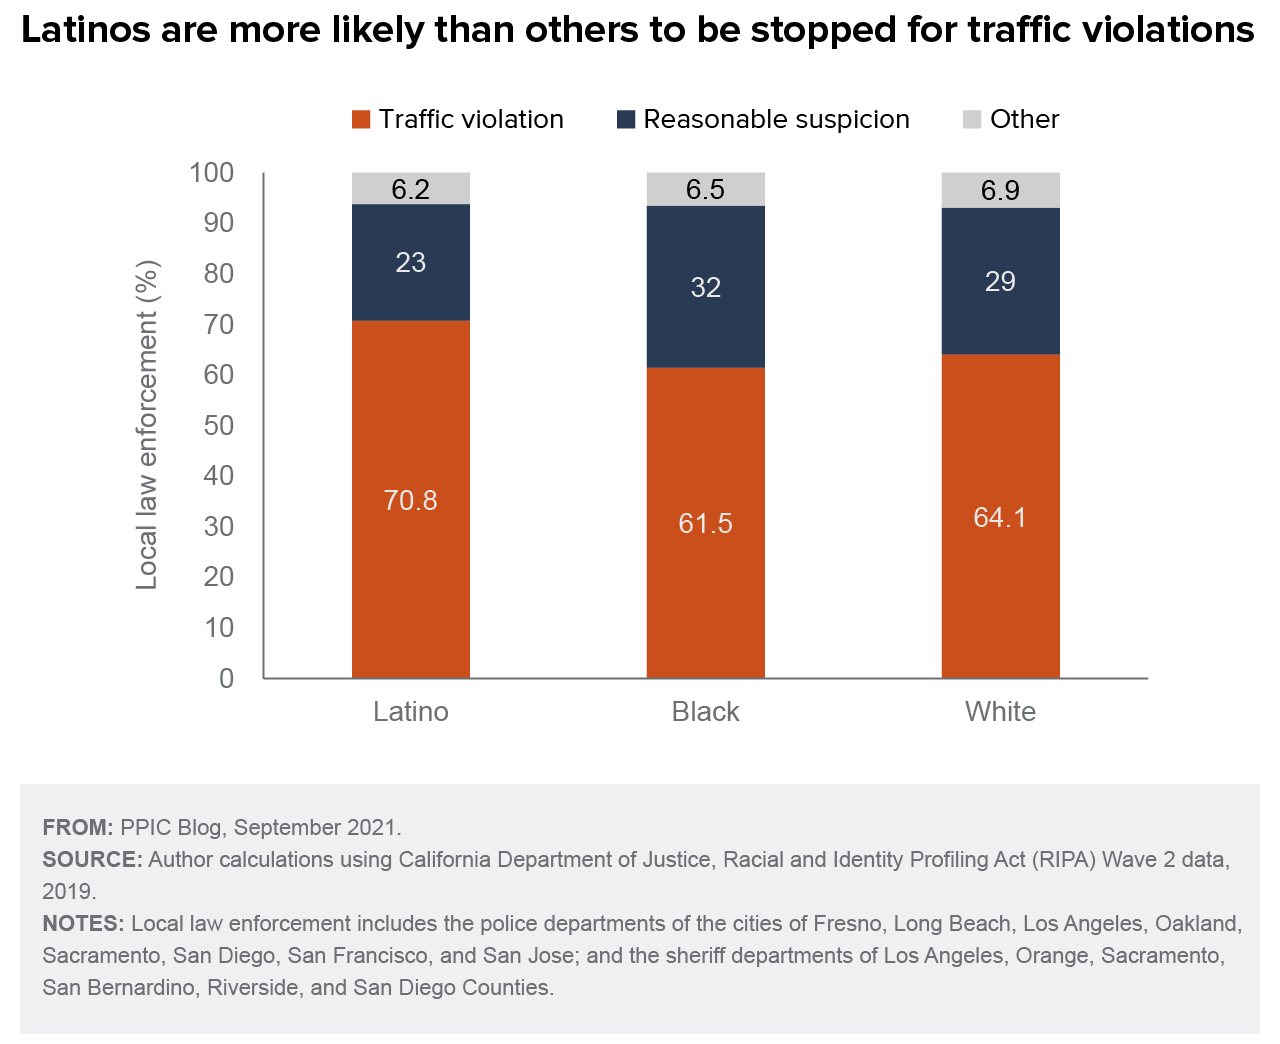 figure - Latinos Are More Likely than Others To Be Stopped for Traffic Violations